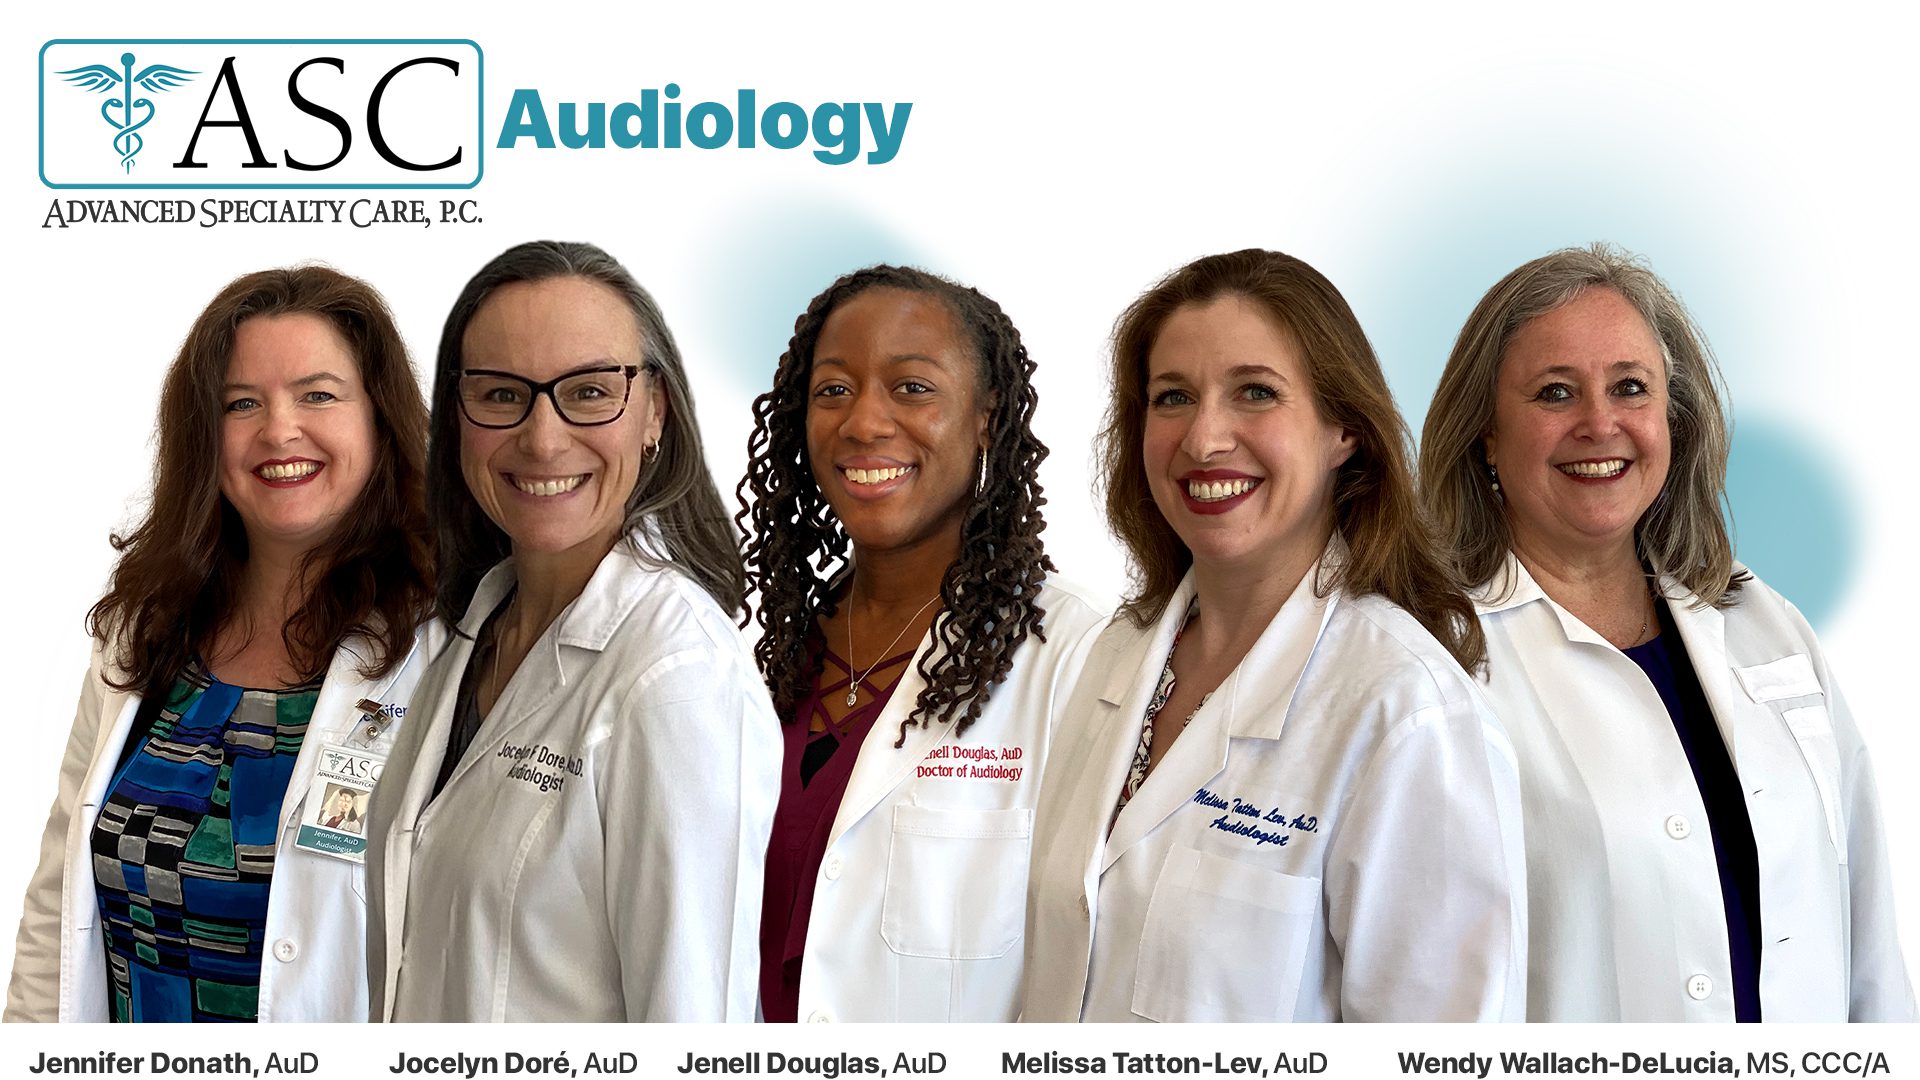 Advanced Specialty Care's Audiologists--Drs. Jennifer Donath, Jocelyn Doré, Jenell Douglas, Melissa Tatton-Lev, and MS, CCC/A Wendy Wallach-DeLucia.